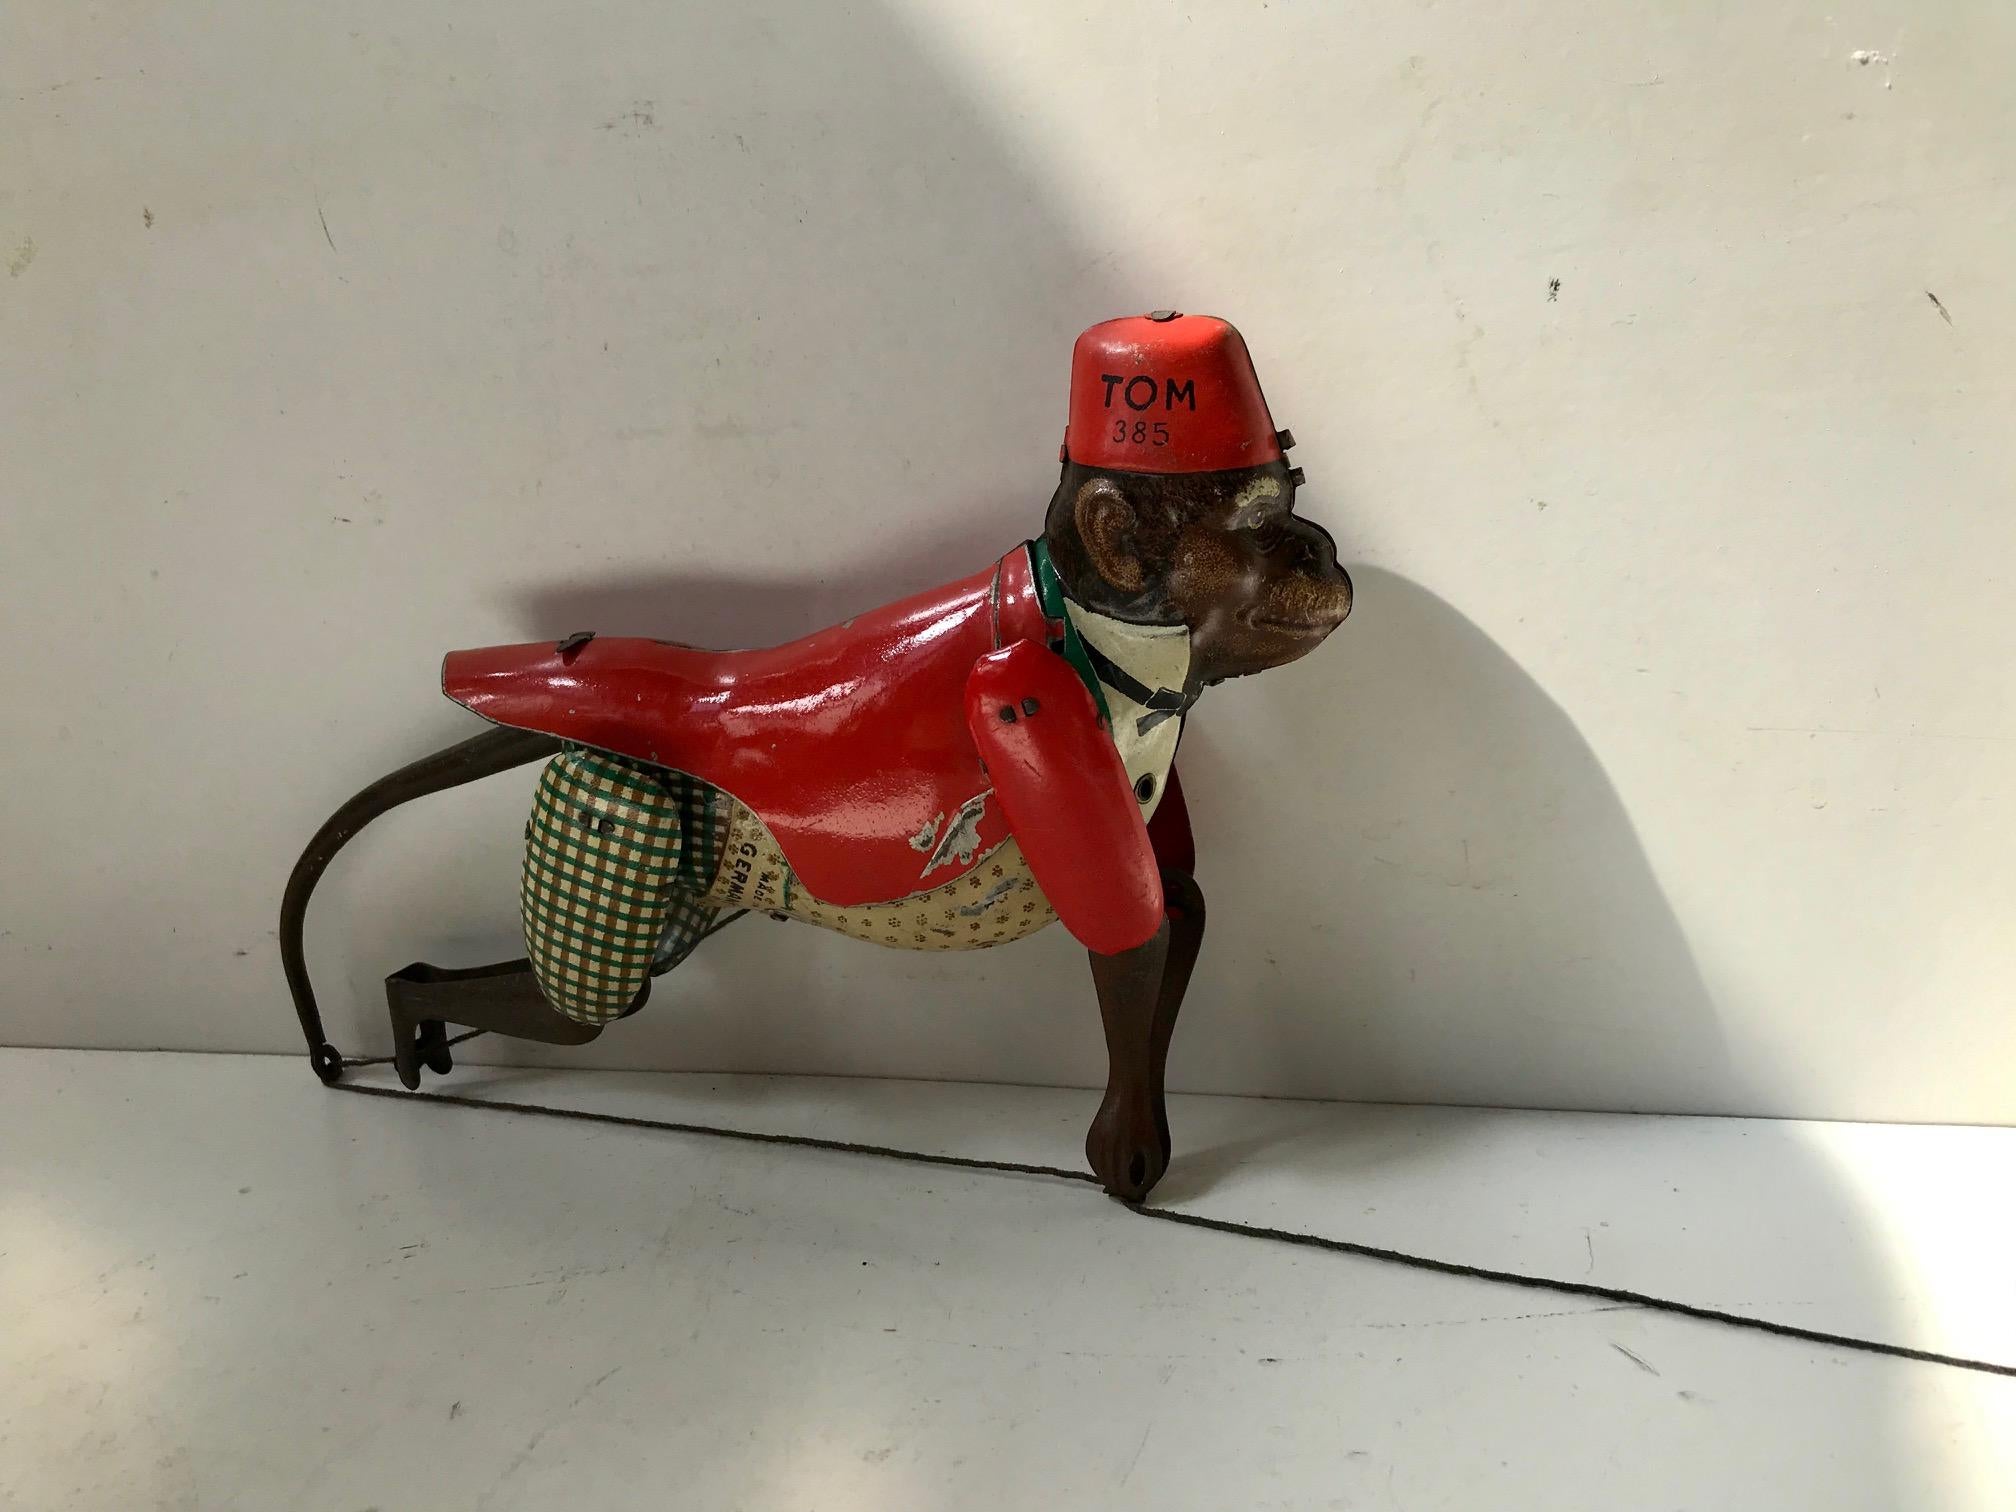 Antique German tin toy - climbing/friction monkey, 1930's.
Manufactory: Lehmann
Materials: Lithographic tin
Model: TOM 385.
Markinga: Made in Germany, Marke Patent, TOM 385.
  